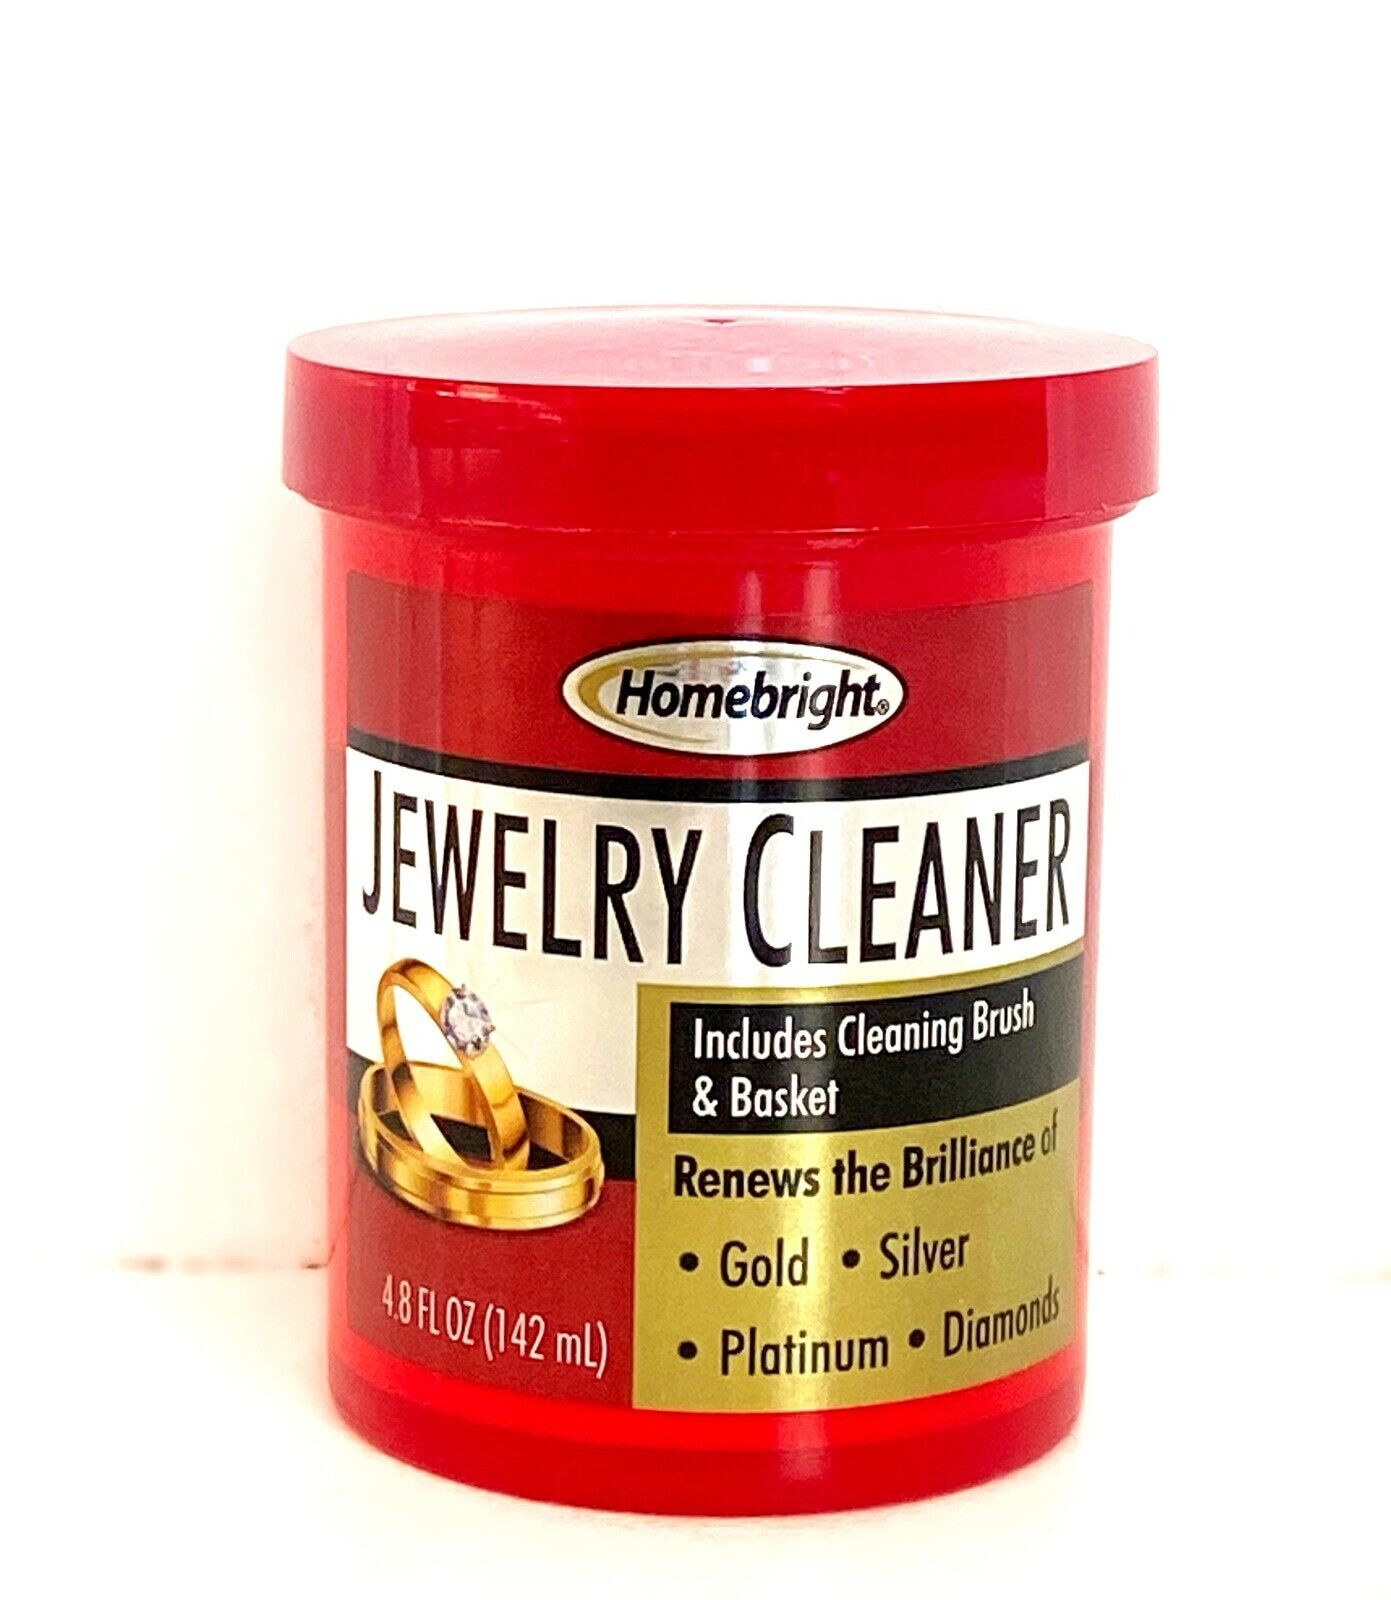 Jewelry Cleaner Solution Safely Clean All Jewelry Gold Silver Diamonds Stones Unbranded